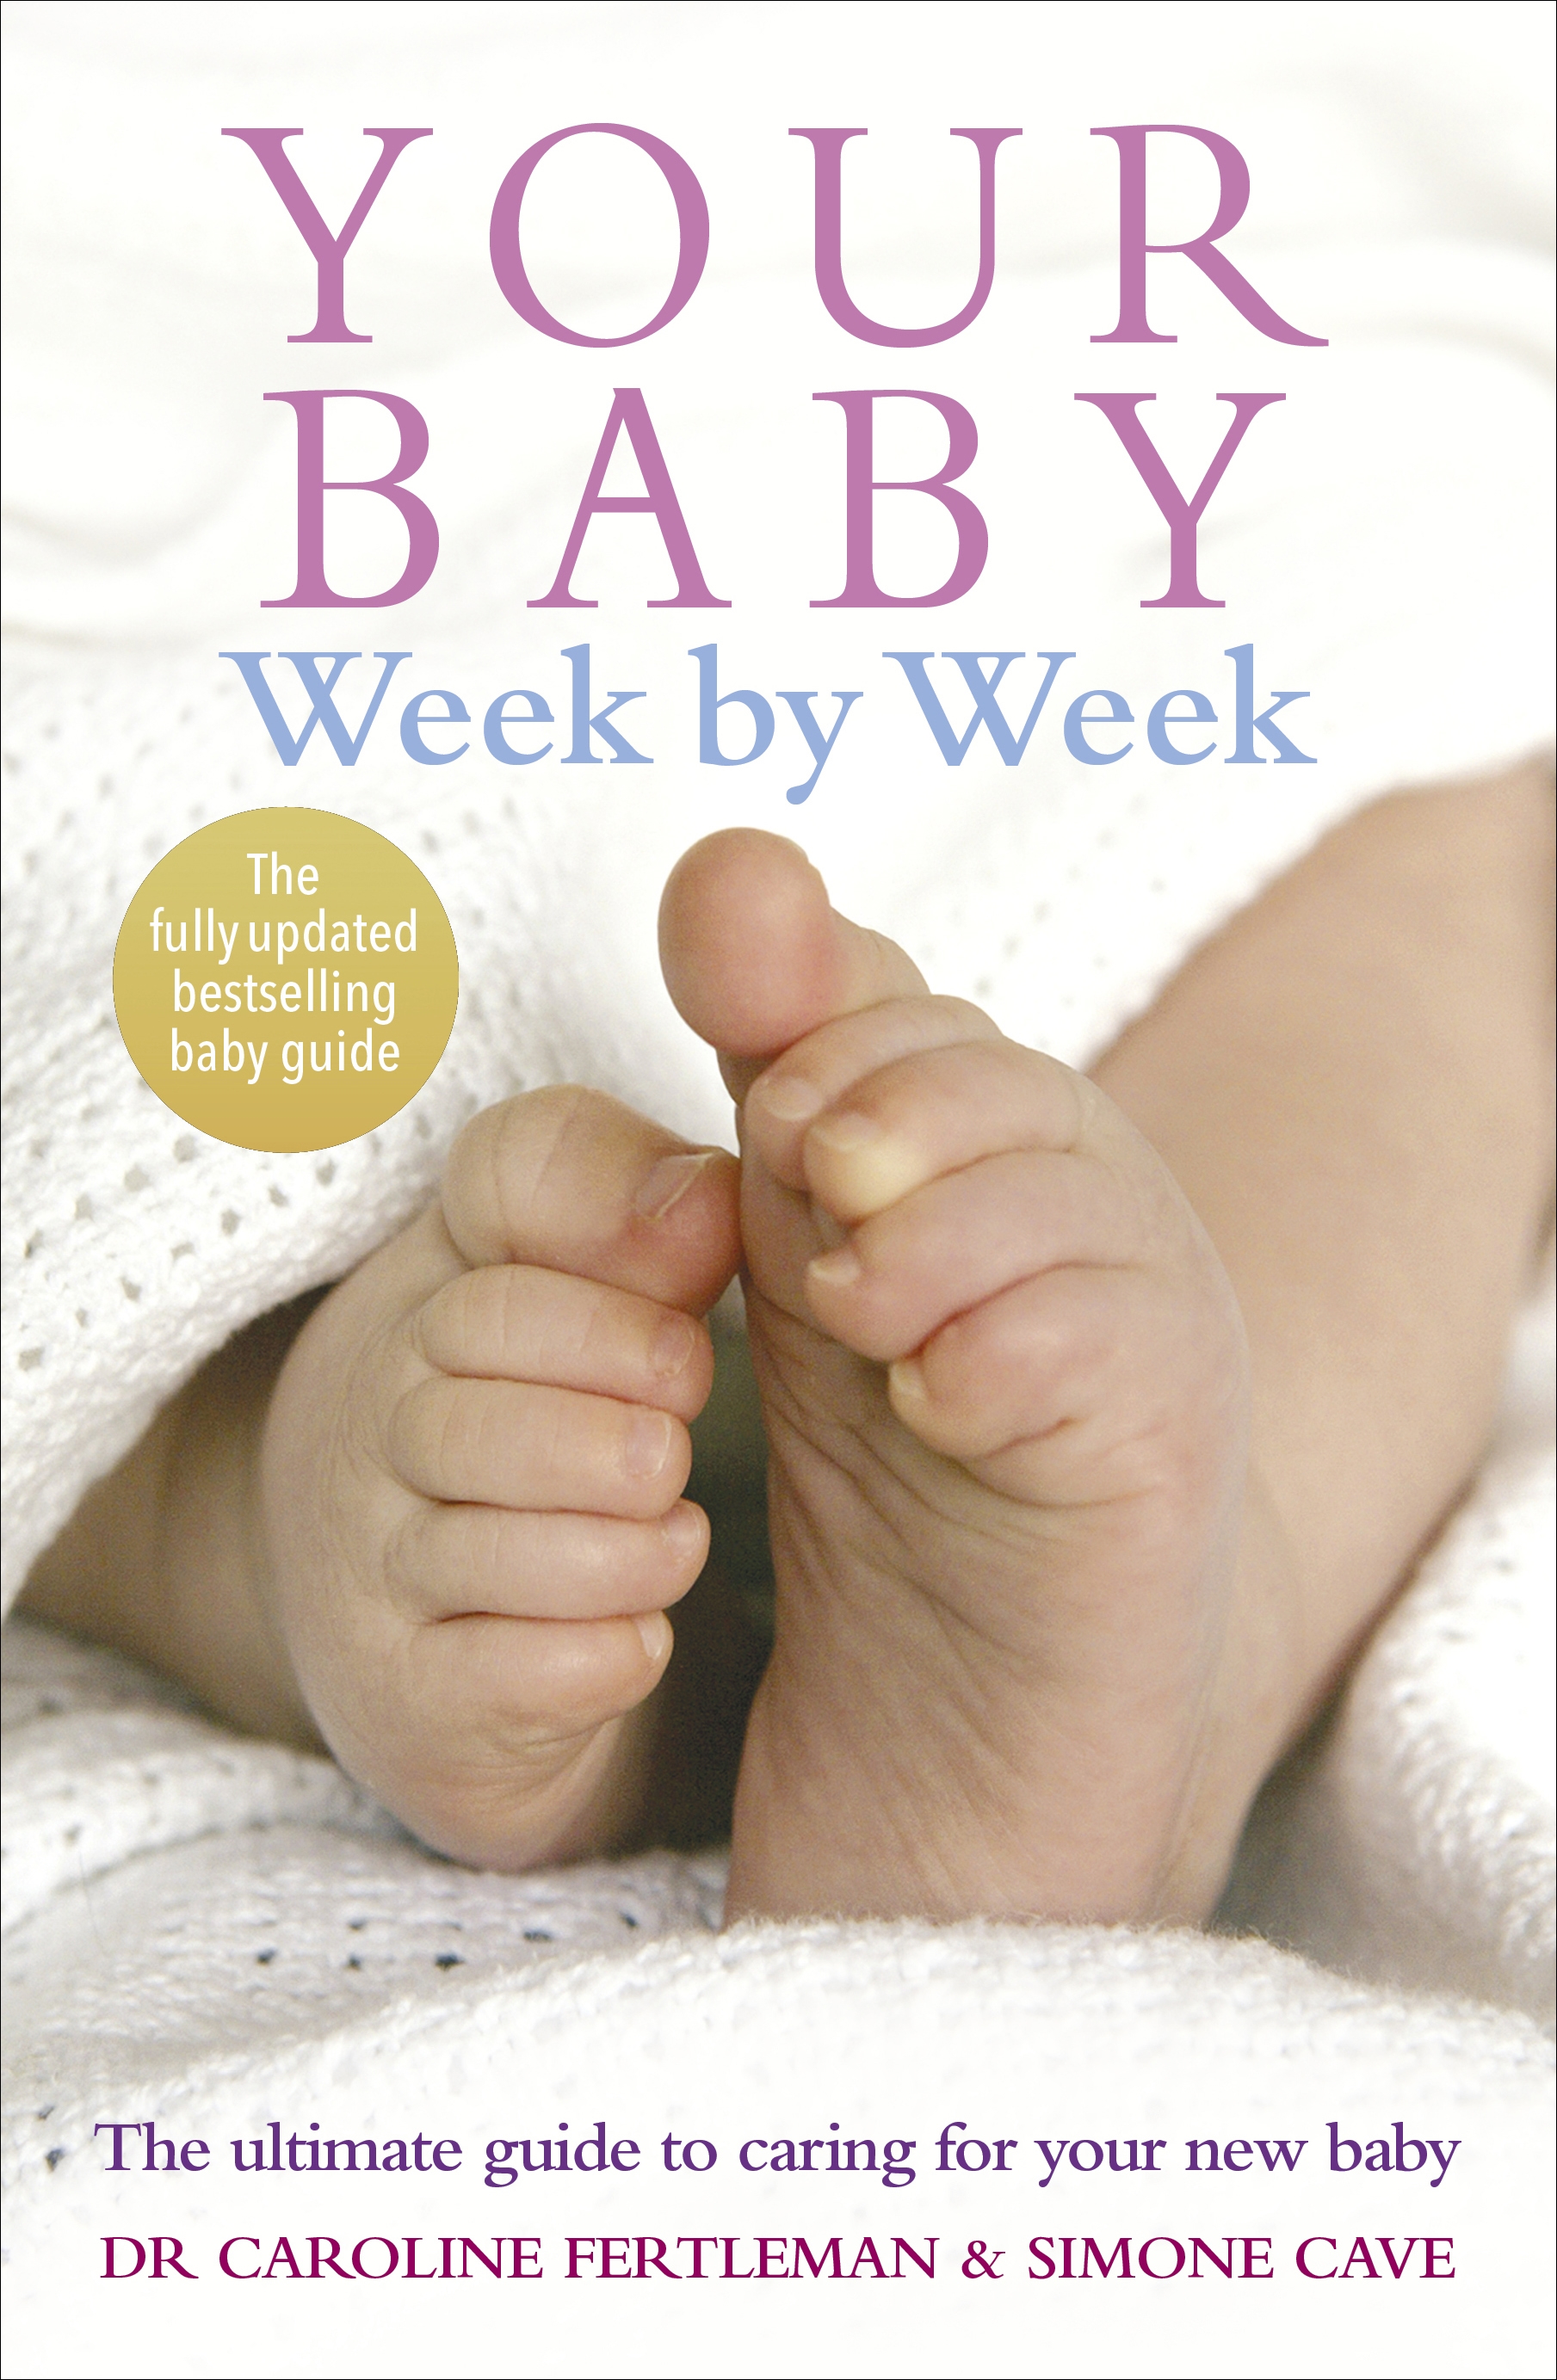 Baby Week By Week Development App: Everything You Need To Know